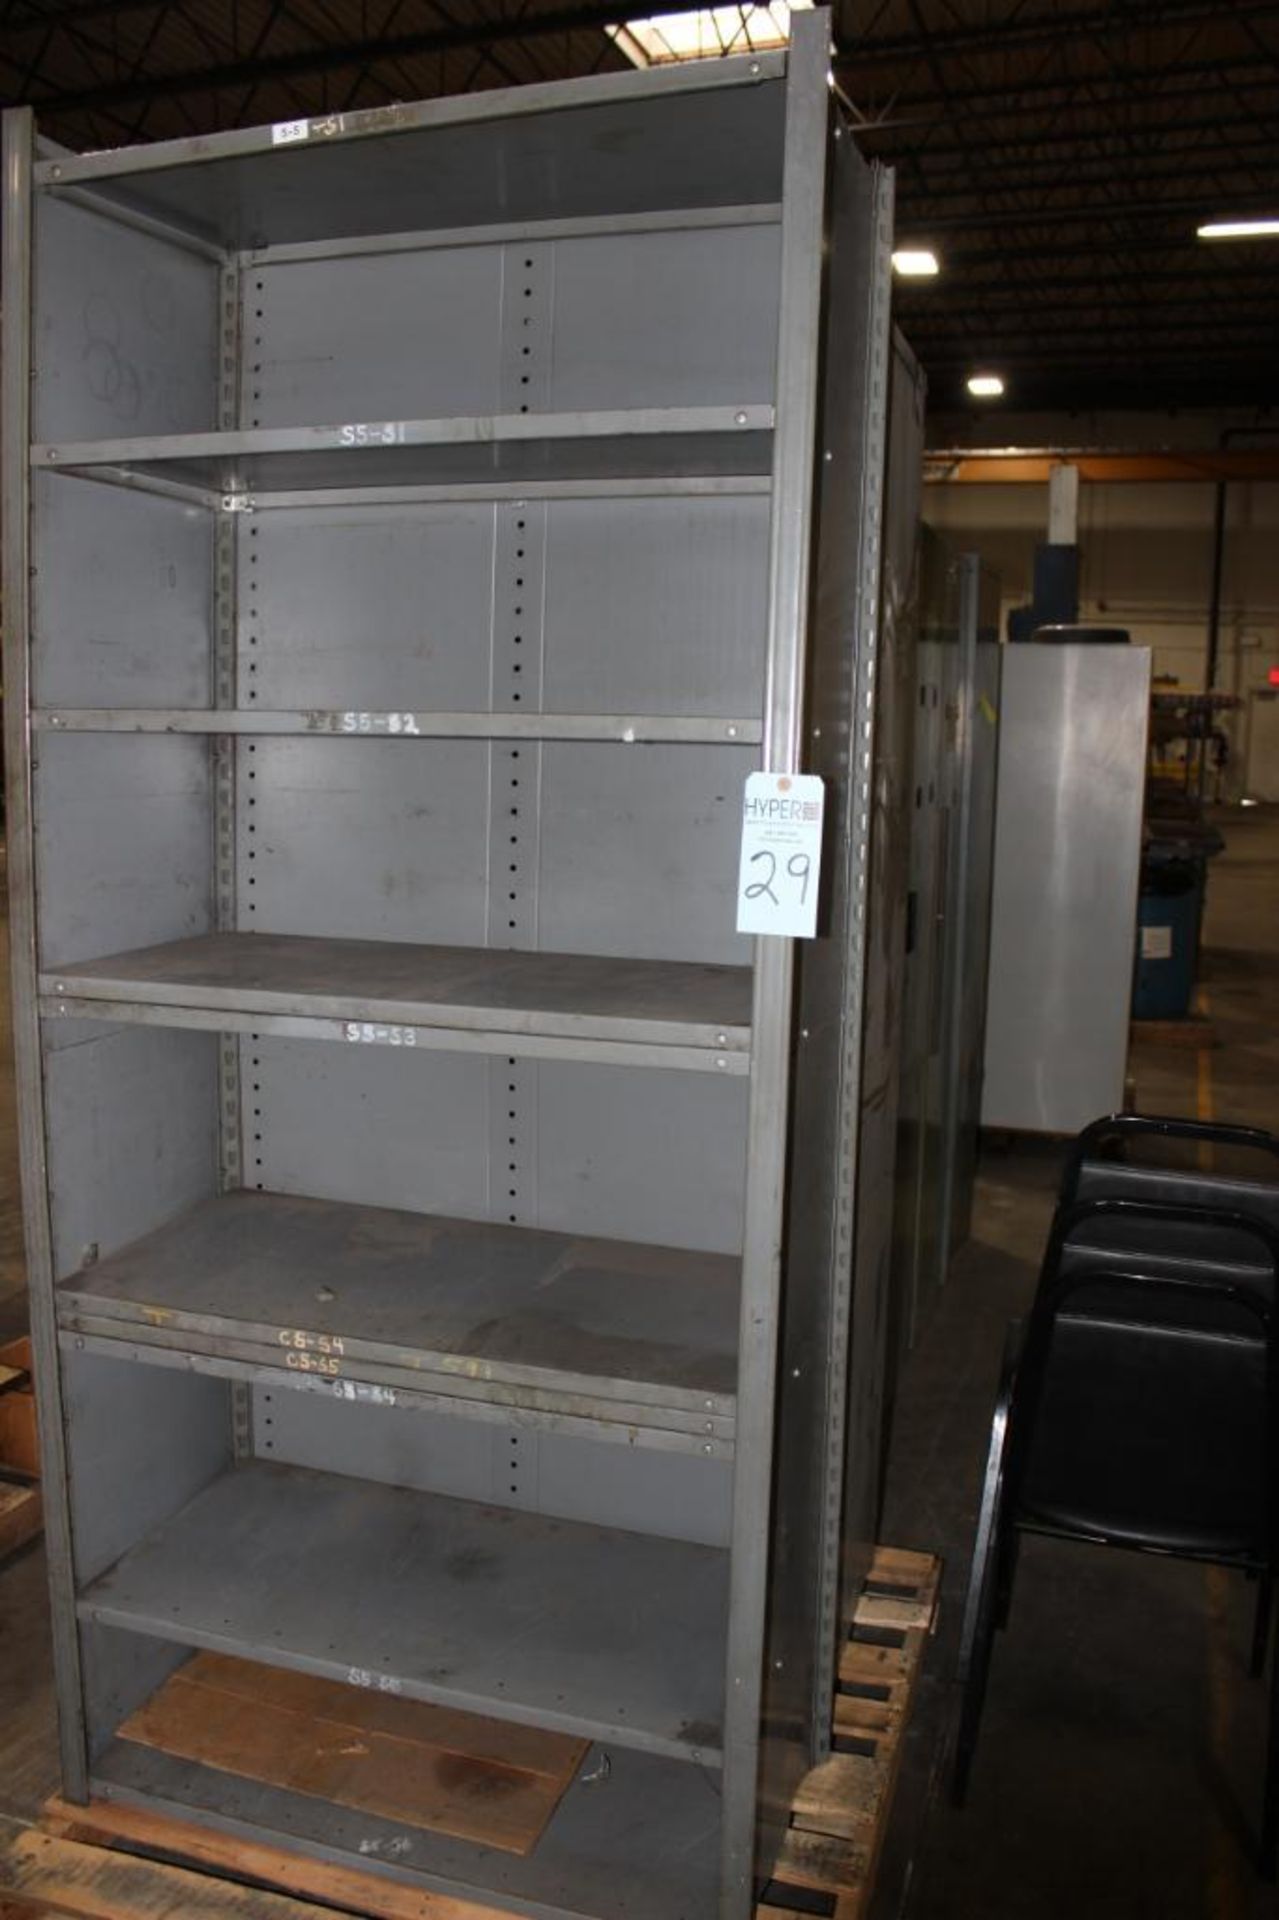 Lot of Storage Shelves & Cabinets c/o: 3 shelves 1-7'x36"x18"; 2- 6'6"x36"x18" & 4- cabinets 6'6"x36